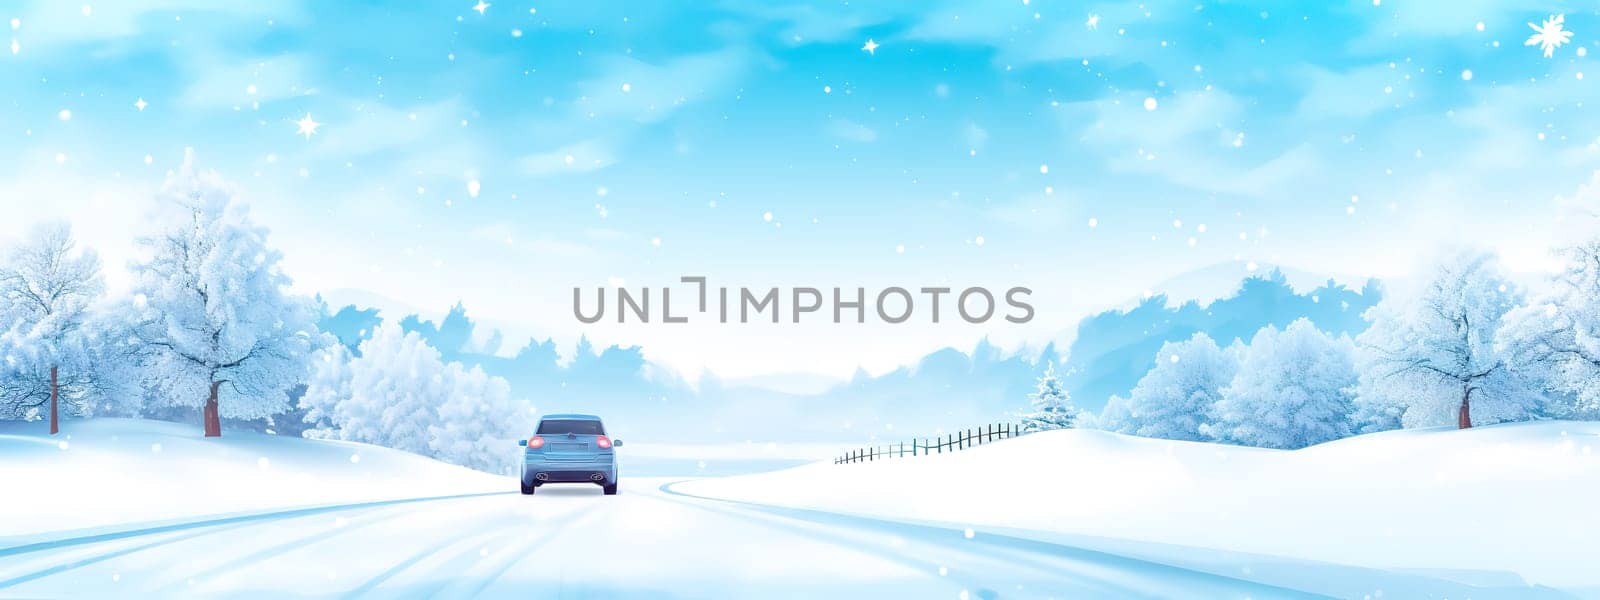 serene winter landscape with a single car traveling on a snow-covered road flanked by frosty trees under a soft blue sky, offering ample copy space banner